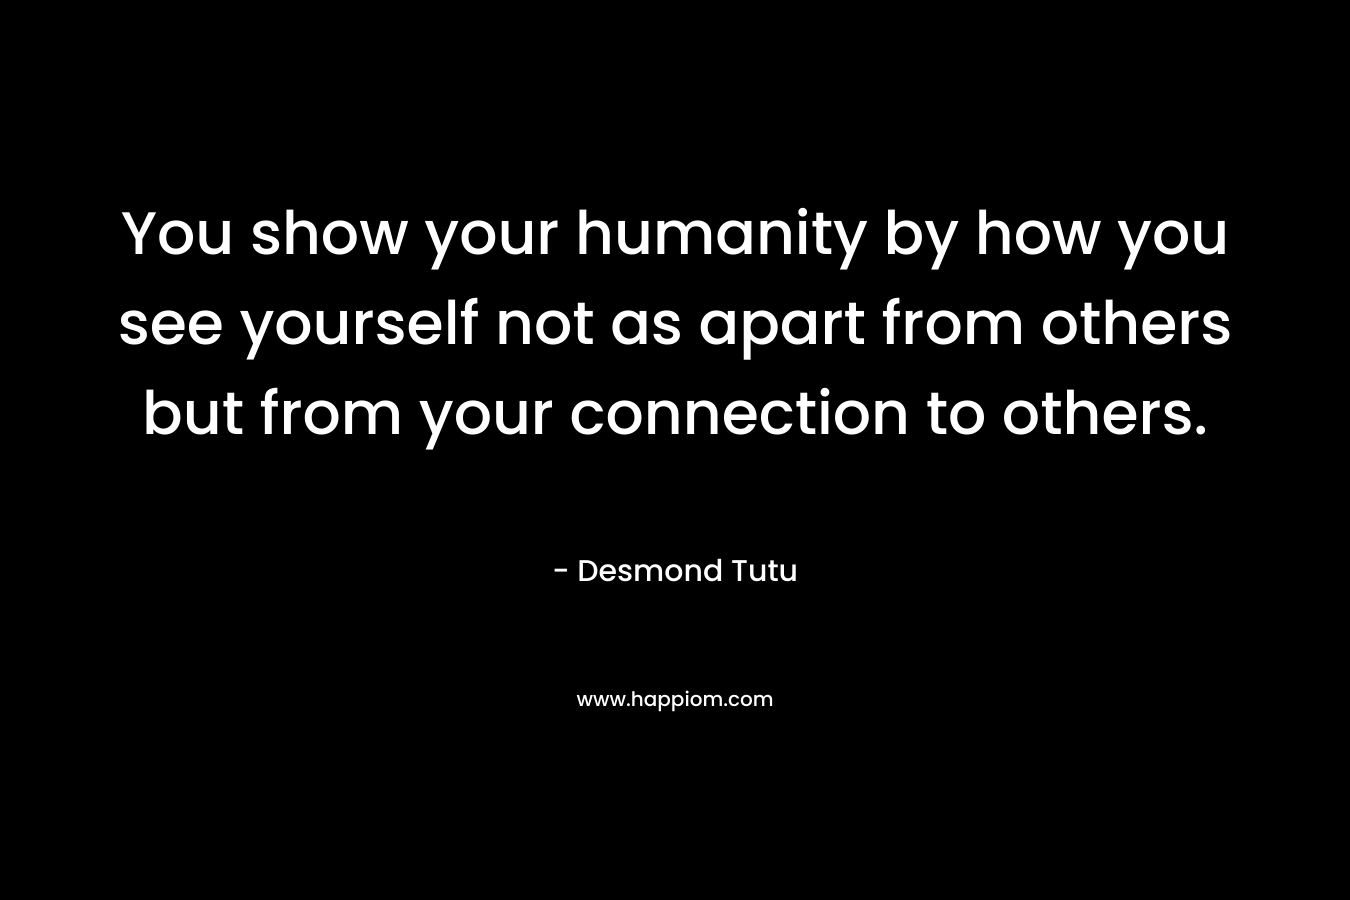 You show your humanity by how you see yourself not as apart from others but from your connection to others. – Desmond Tutu